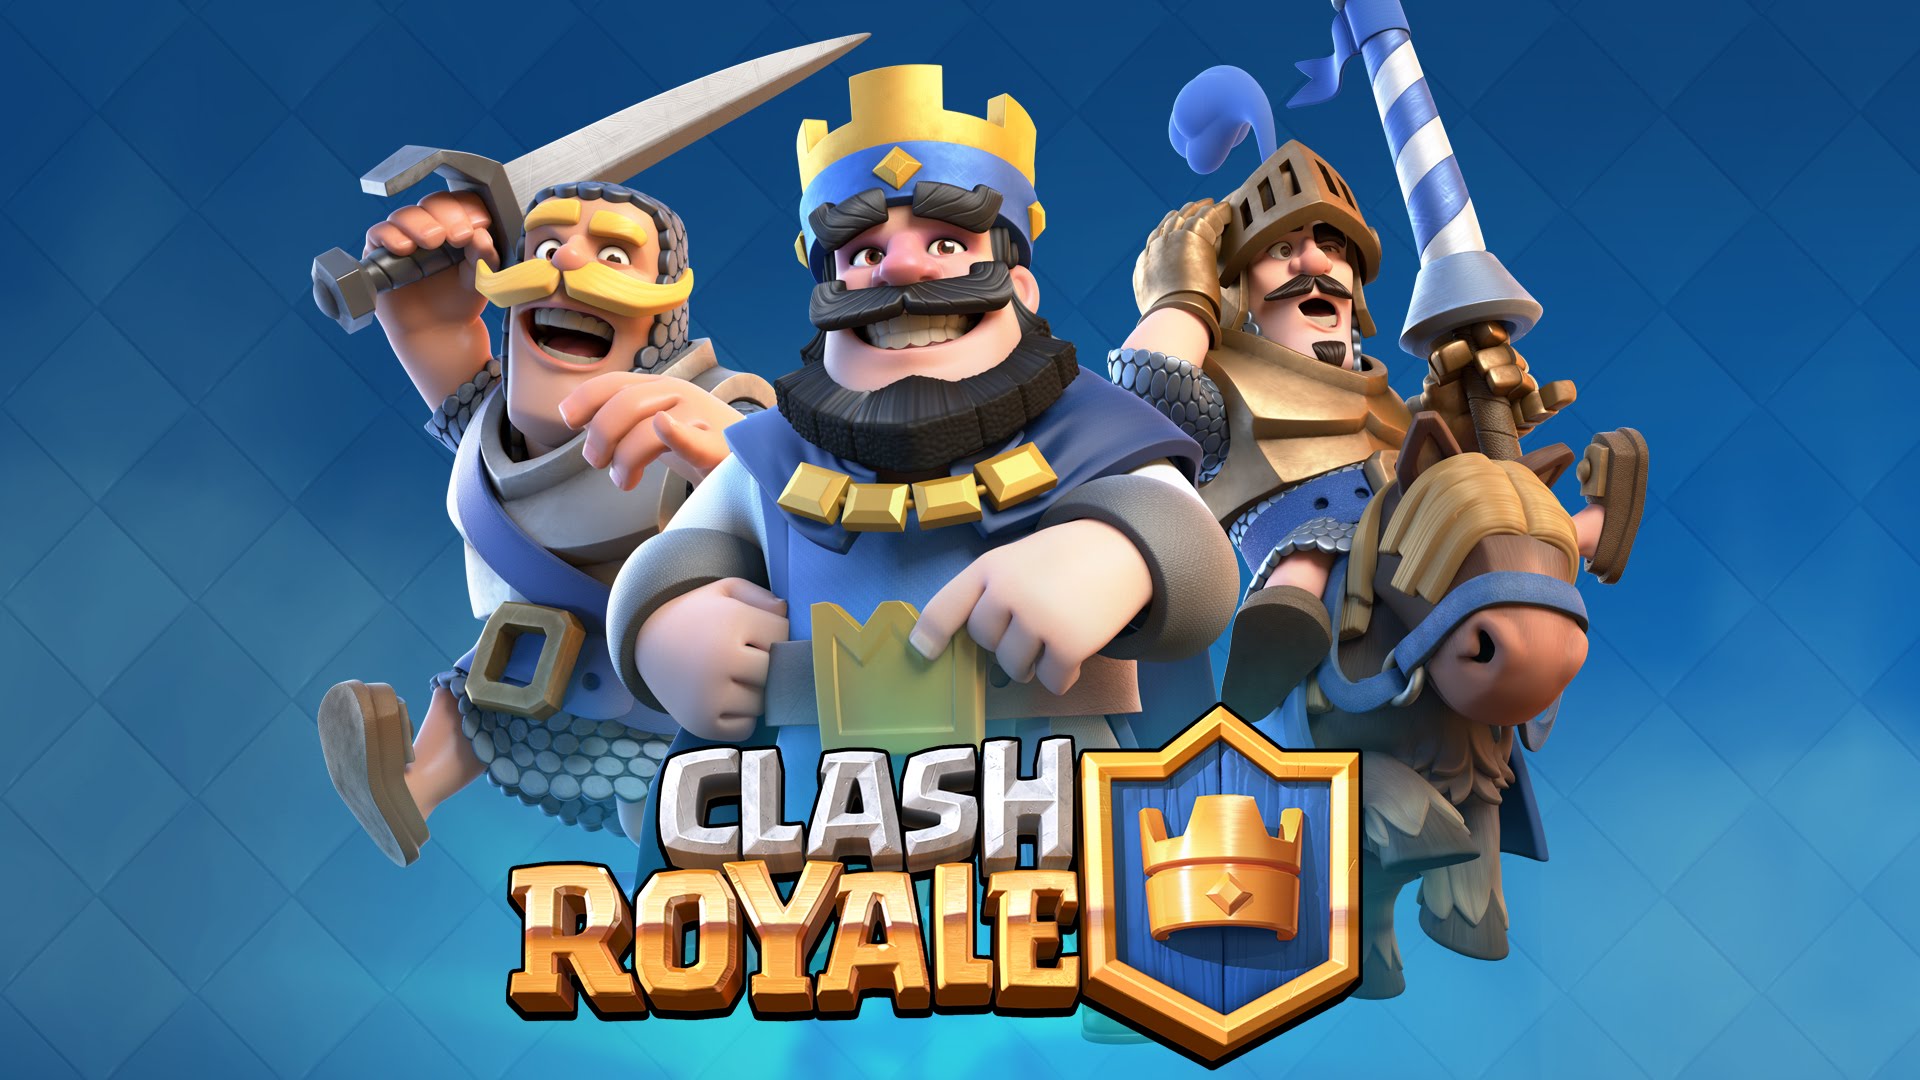 Clash Royale Wallpaper HD Full Pictures